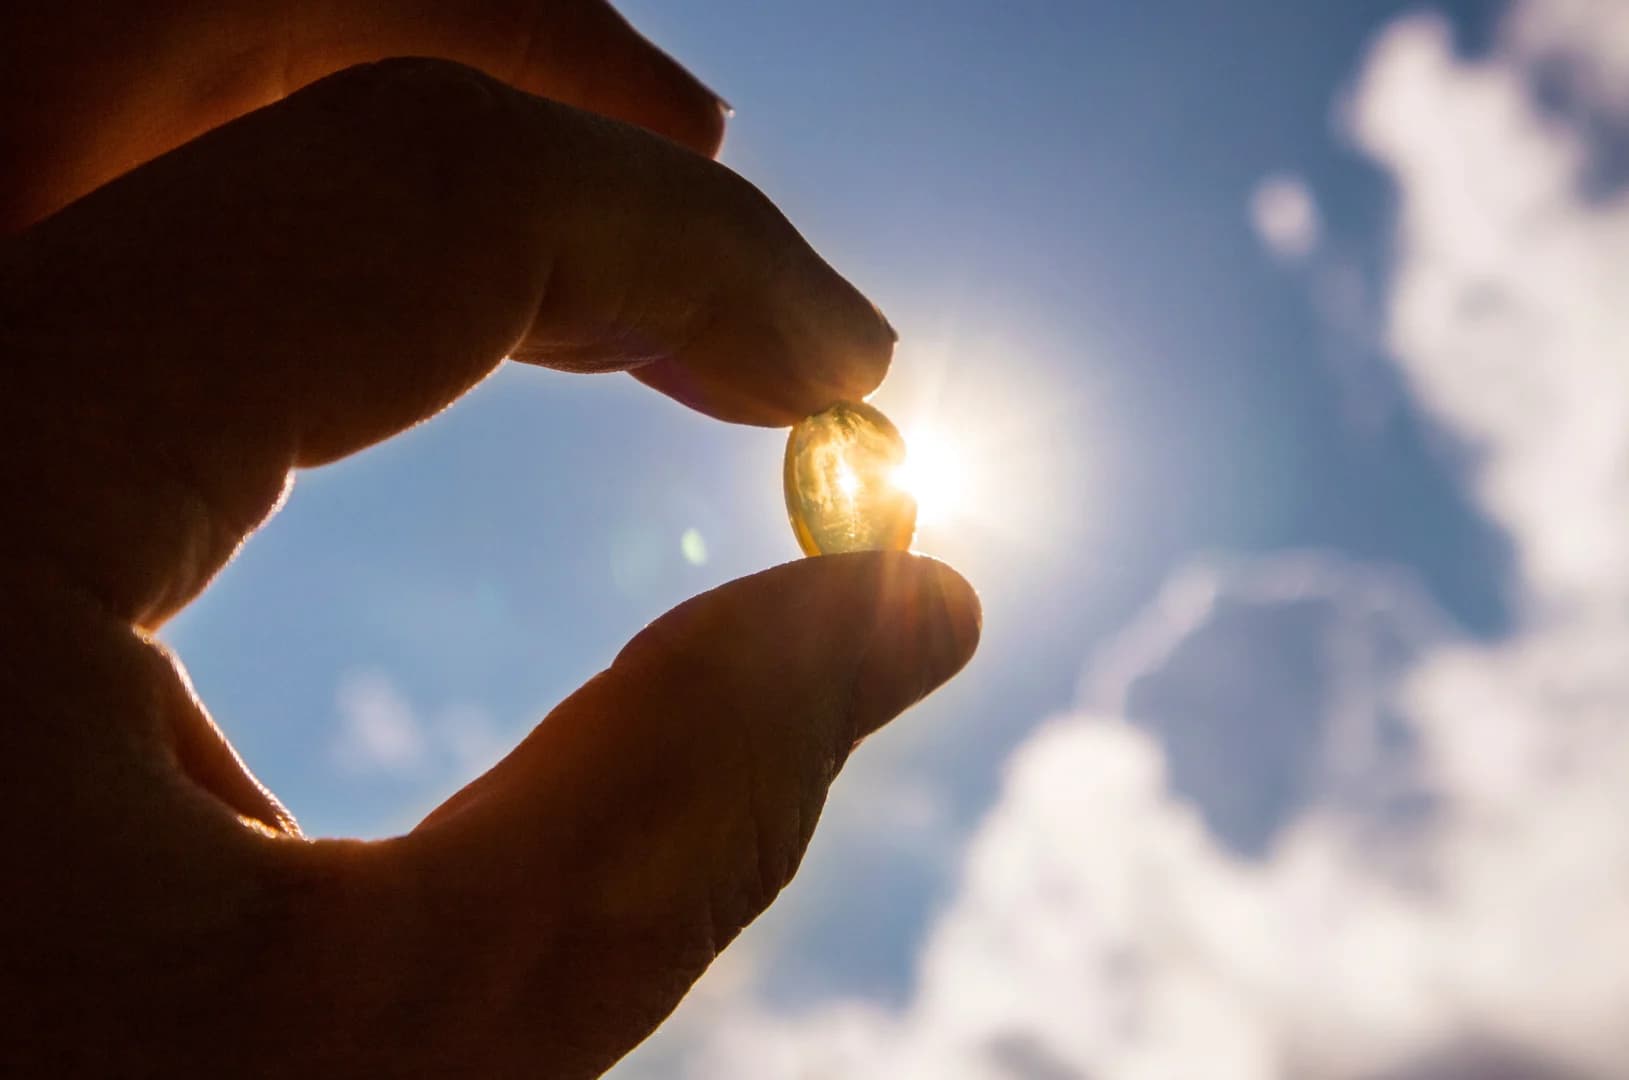 New study finds Vitamin D ‘safe and effective’ in preventing COVID-19